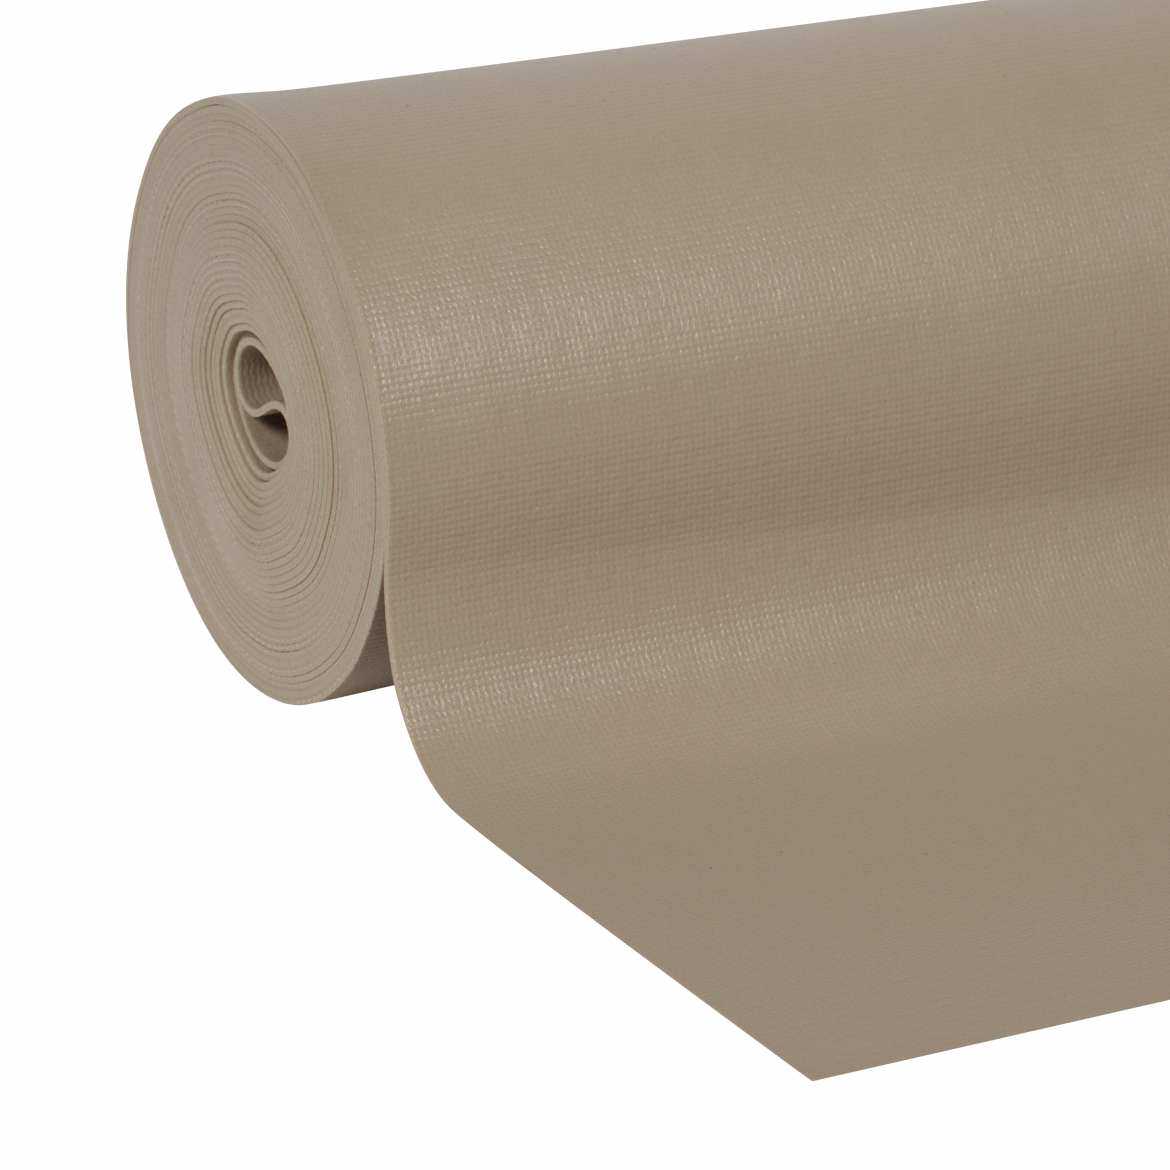 Solid Grip Easy Liner Brand Shelf Liner - Taupe, 20 in. x 22 ft.